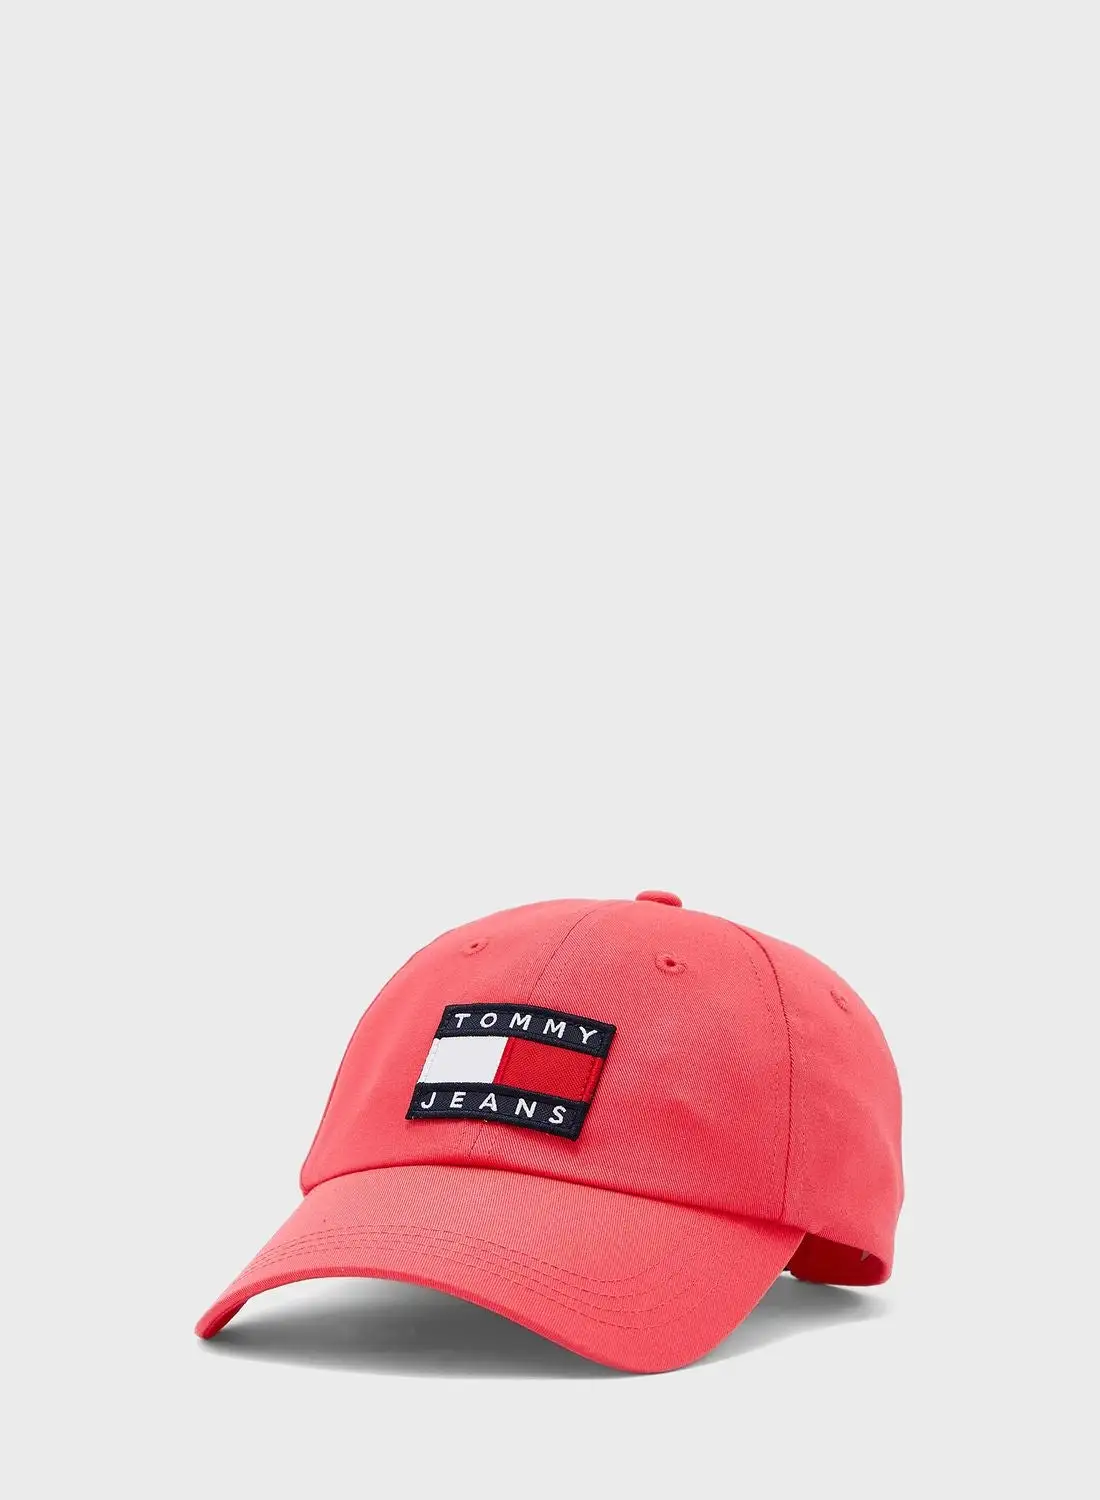 TOMMY JEANS Heritage Cap